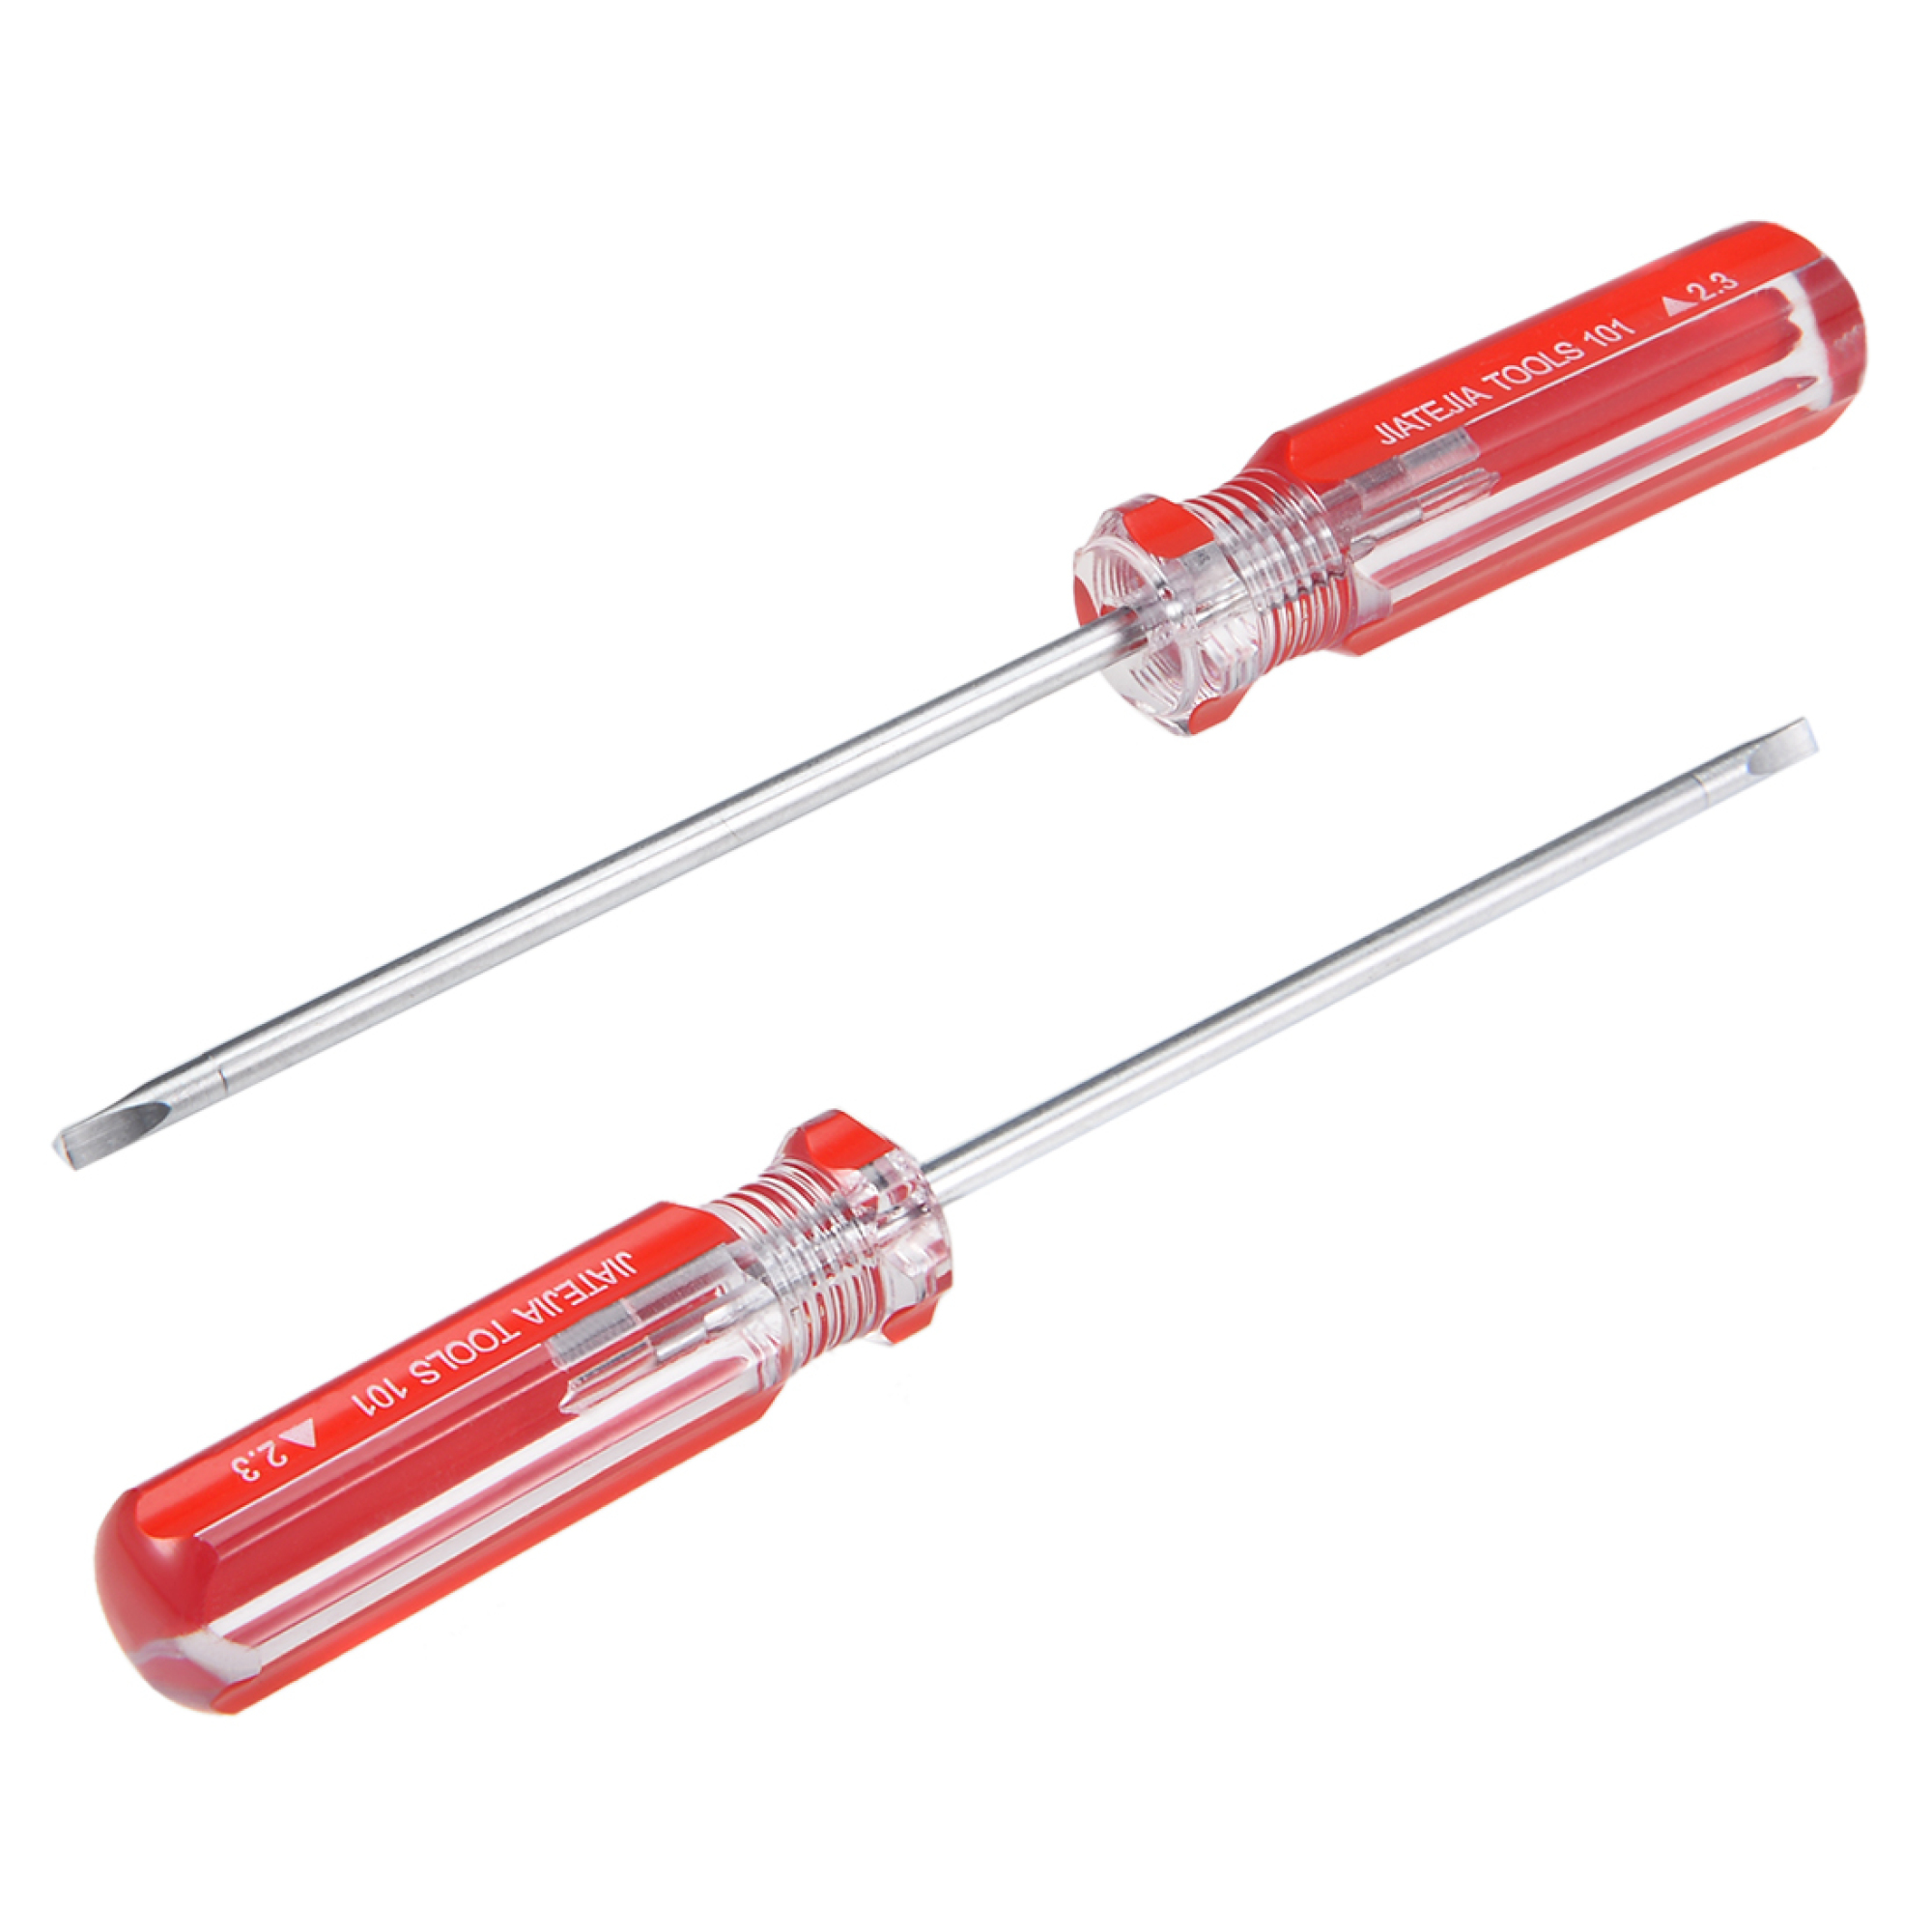 2Pcs Magnetic 2.3mm Triangle Screwdriver with 3 Inch Shaft